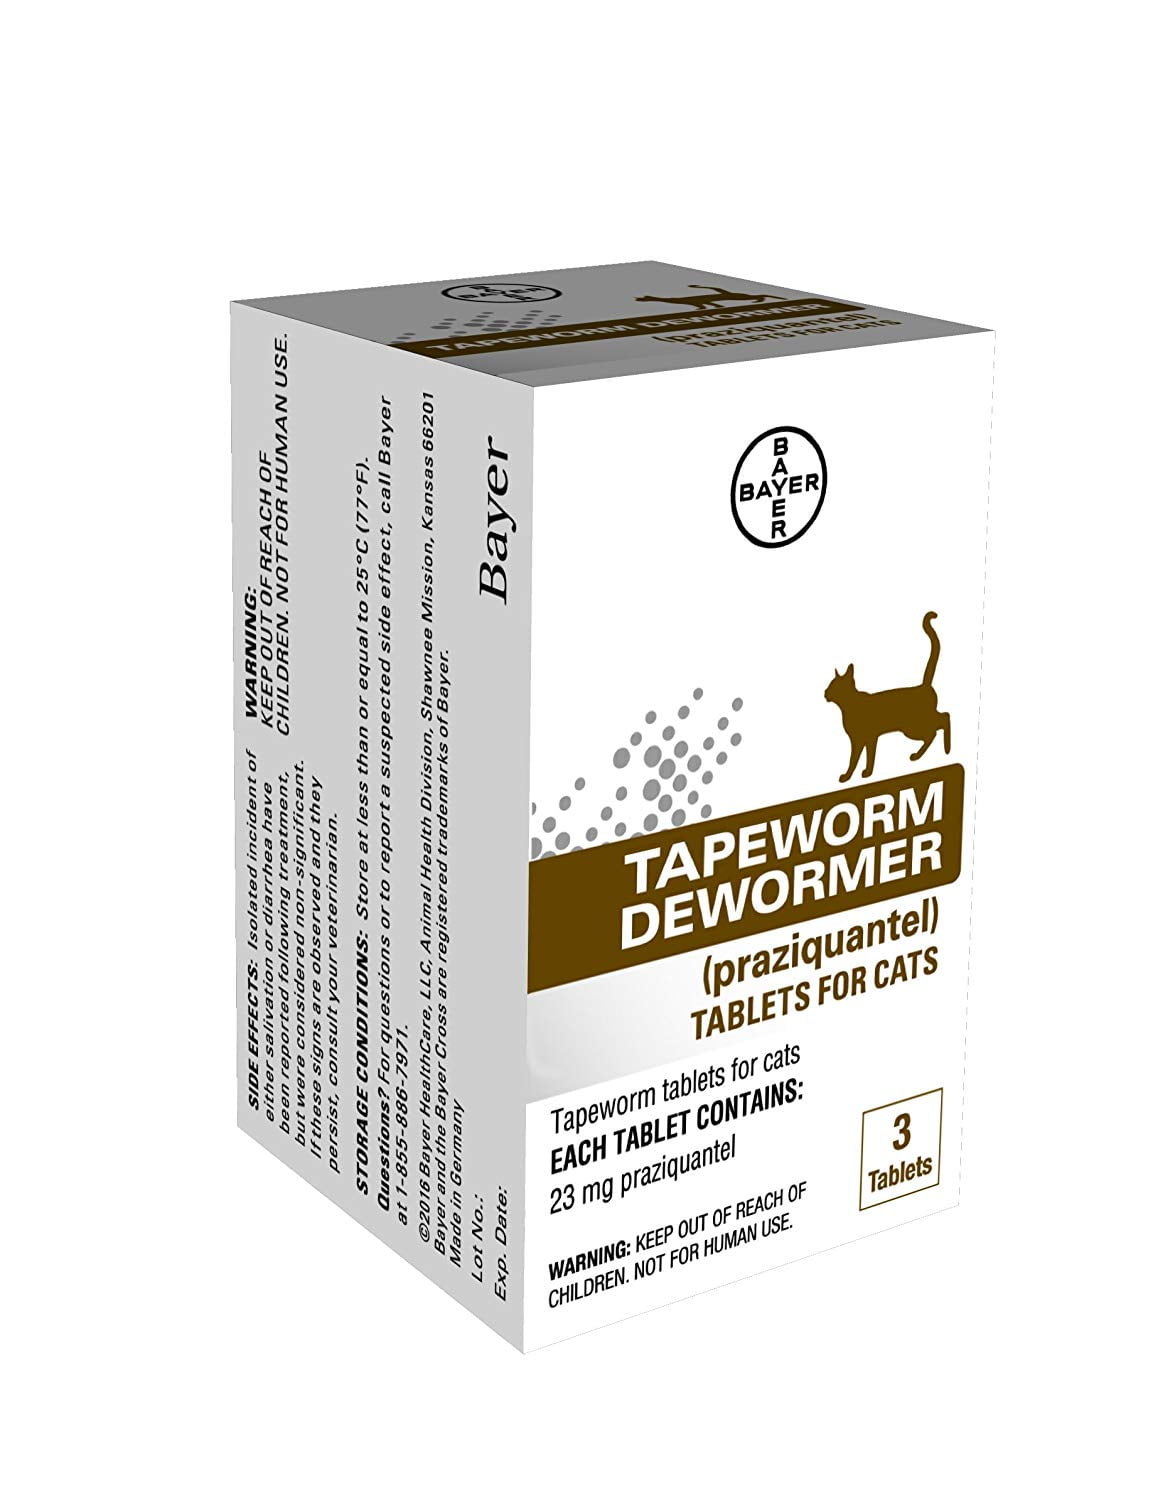 worm medicine for dogs and cats